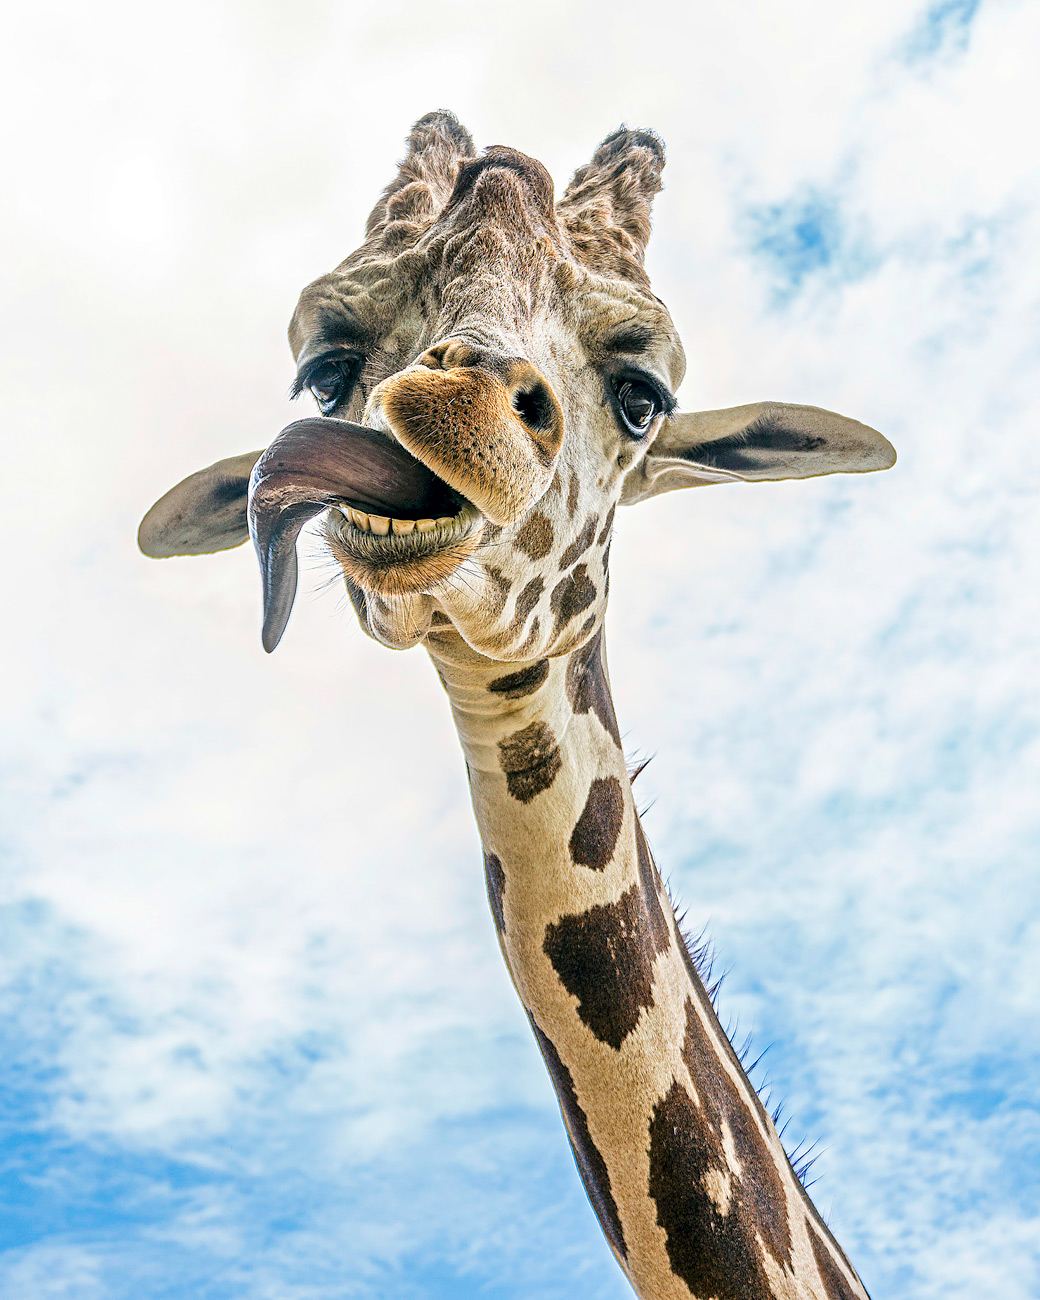 Humorous giraffe with tongue sticking out